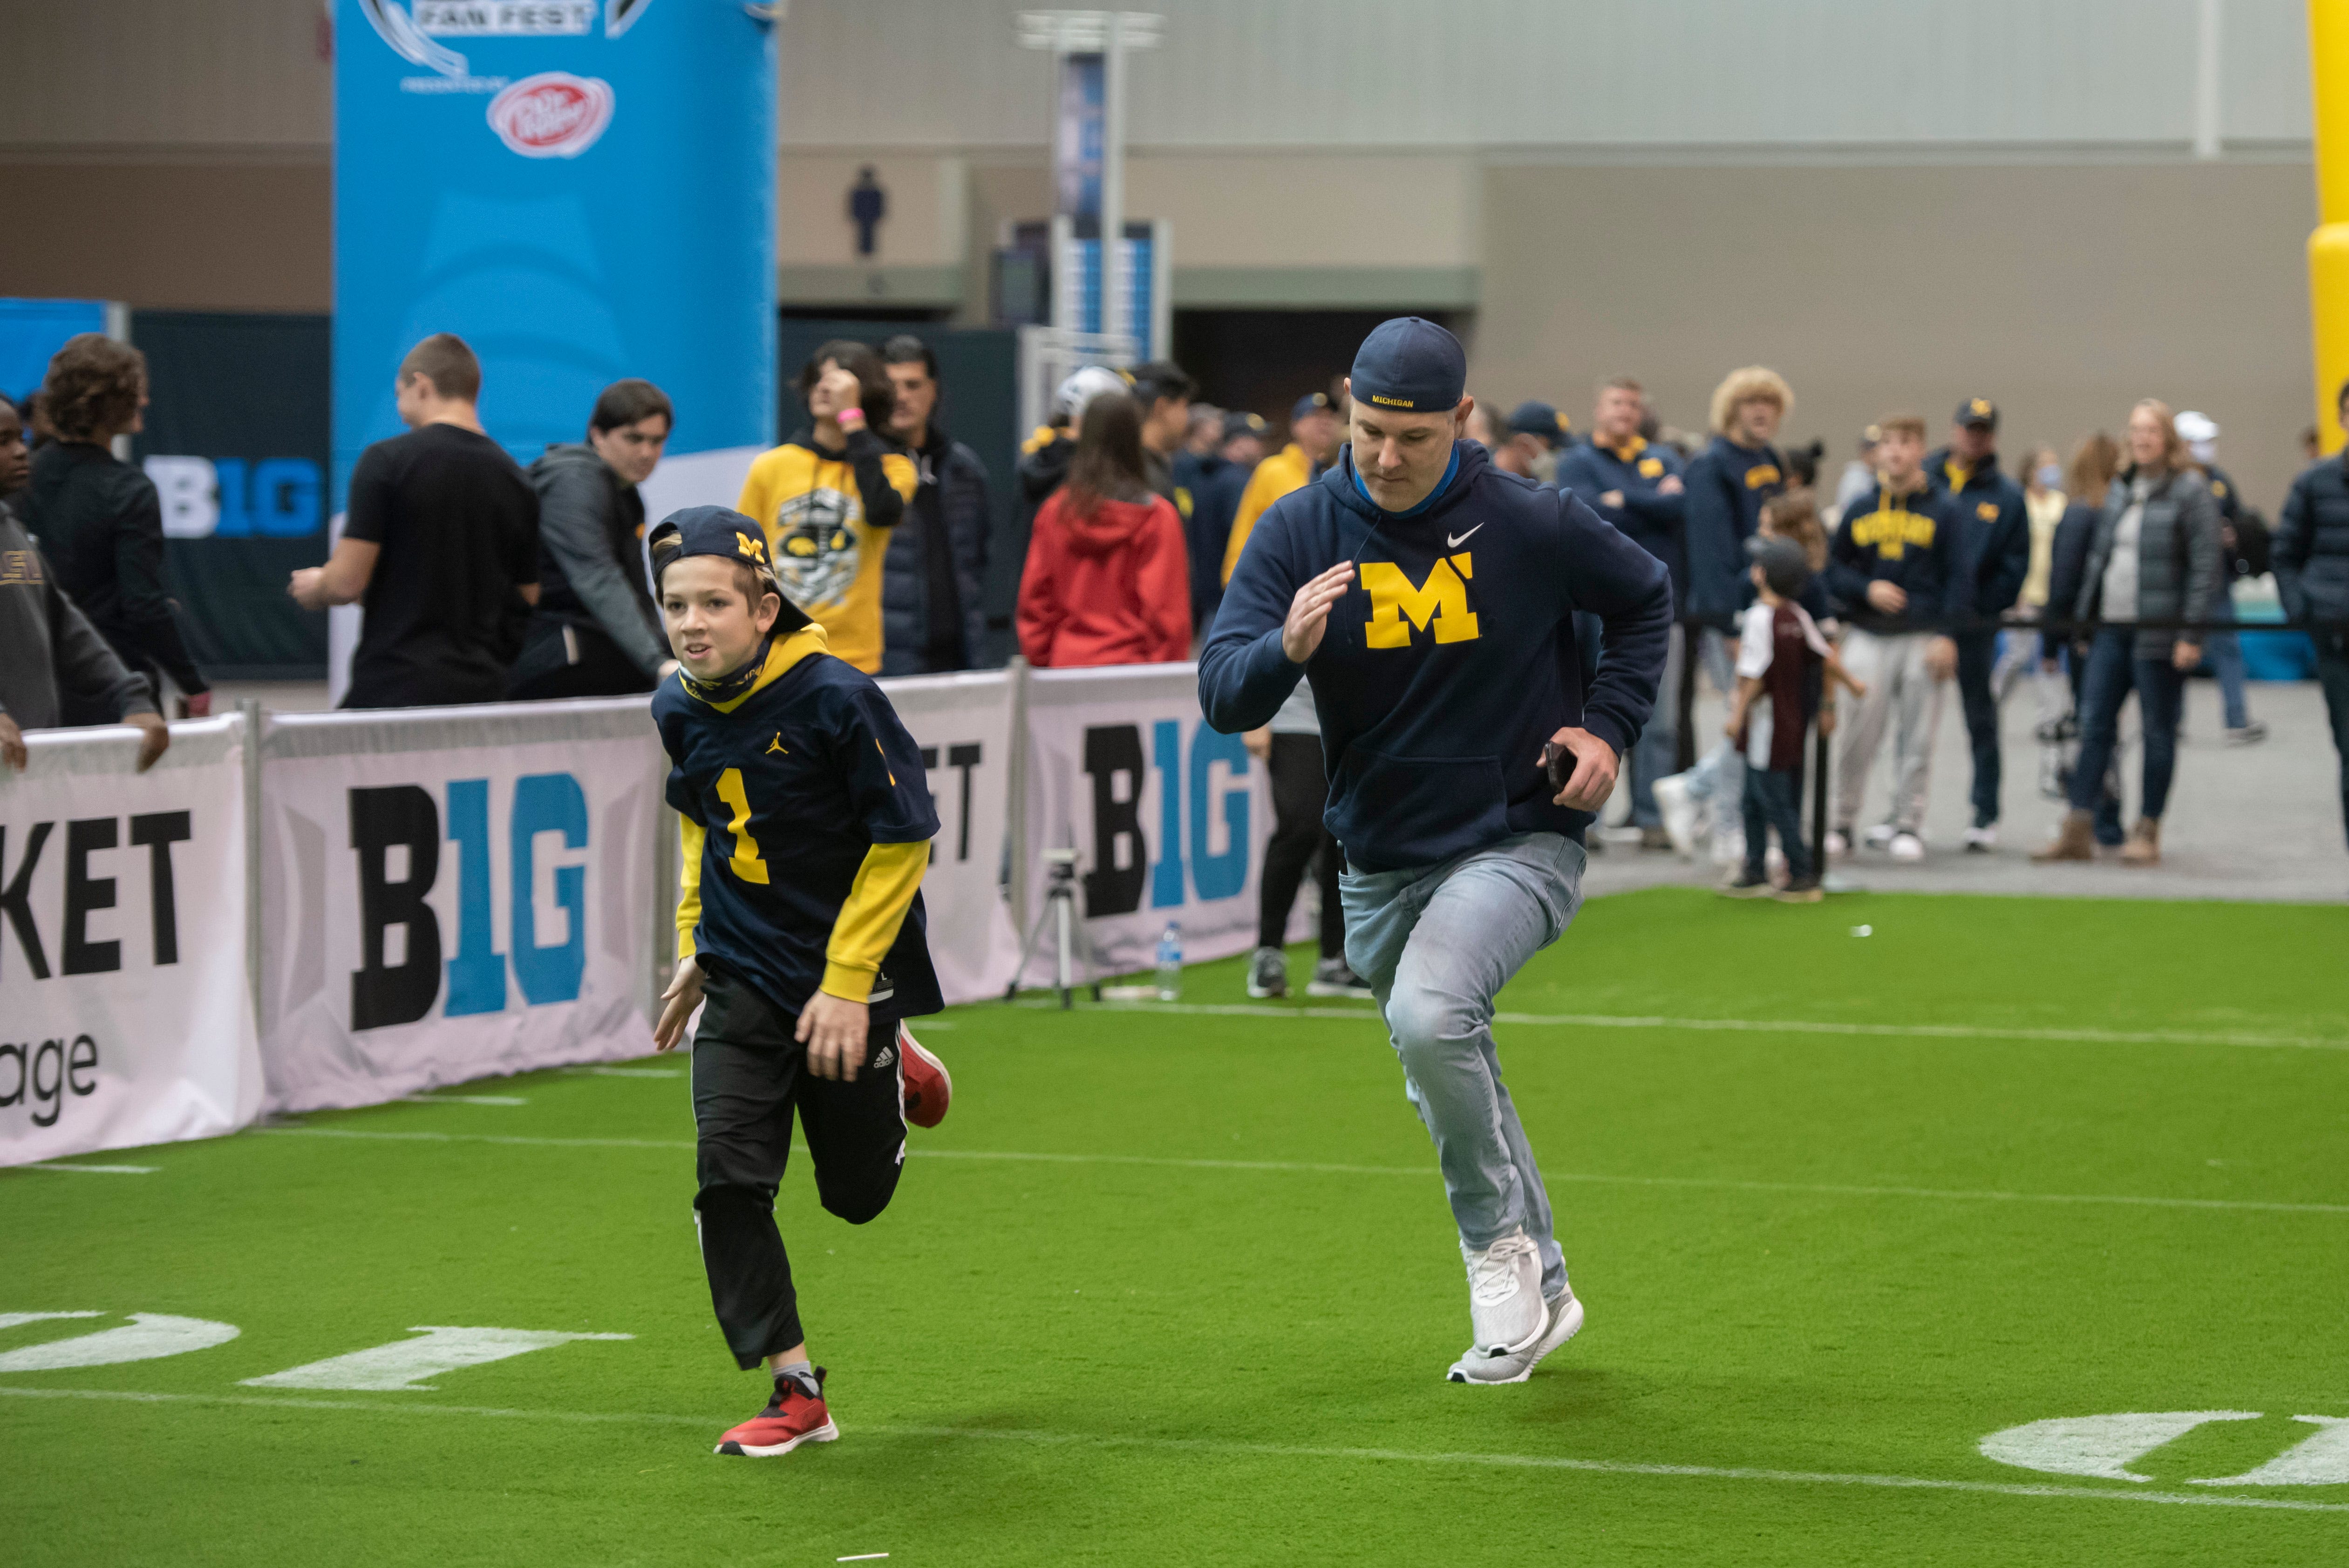 Eleven-year-old Grayson Cichelli, of Chicago, and his father Chris, a Troy native, run a 40-yard-dash at the Fan Fest at the Indiana Convention Center, before the start of the Big Ten championship game.